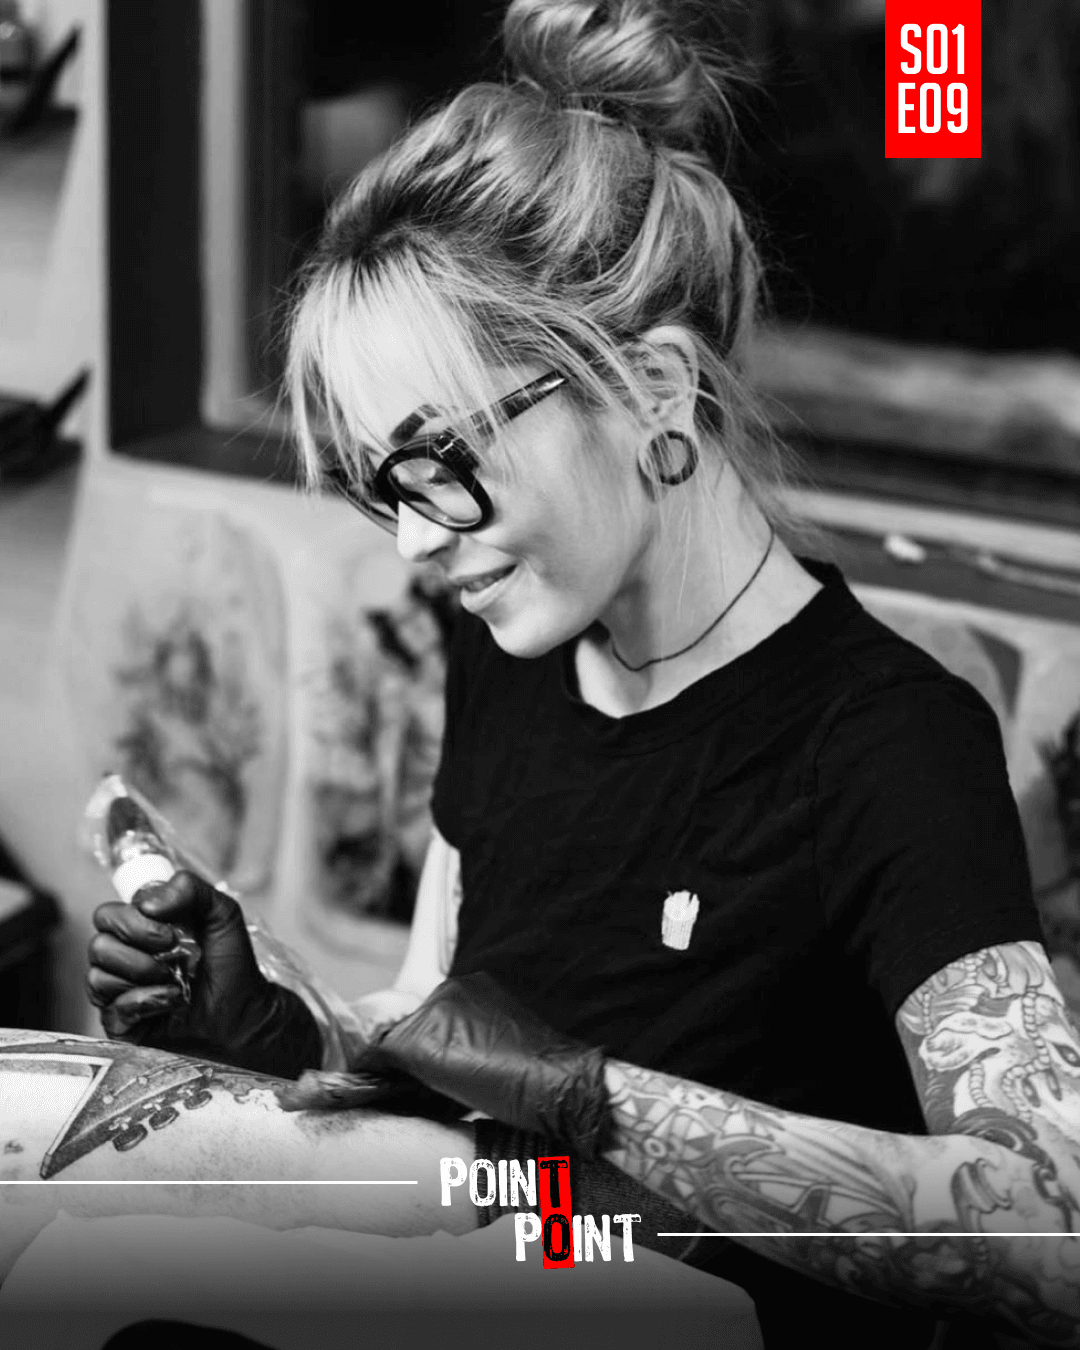 Christina Christie Talks Aging Tattoos, Steve Moore, Google Wisdom And Developing Her Style...